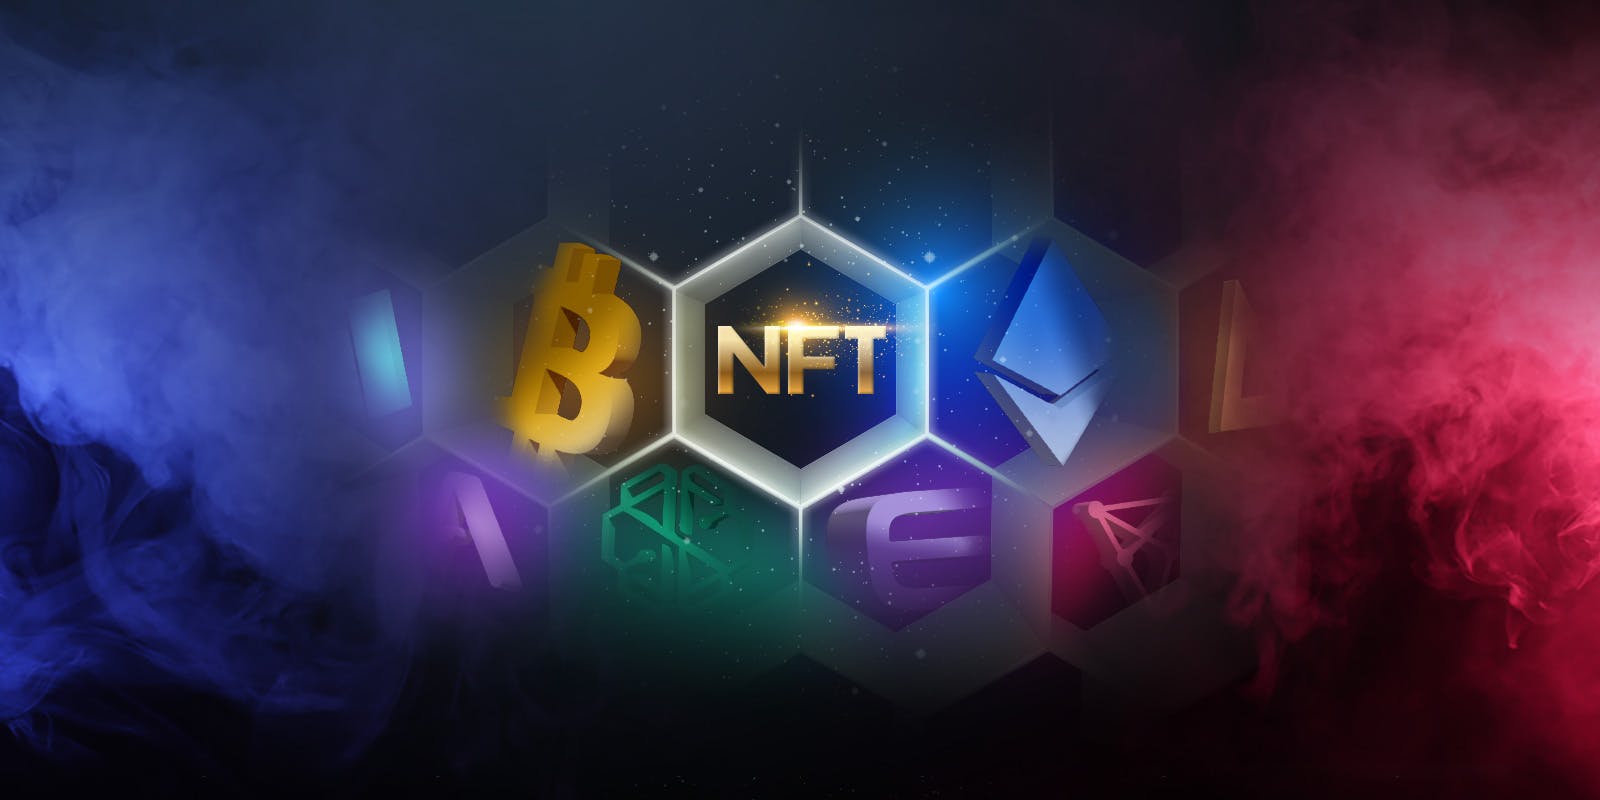 crypto-and-nfts-space-2022